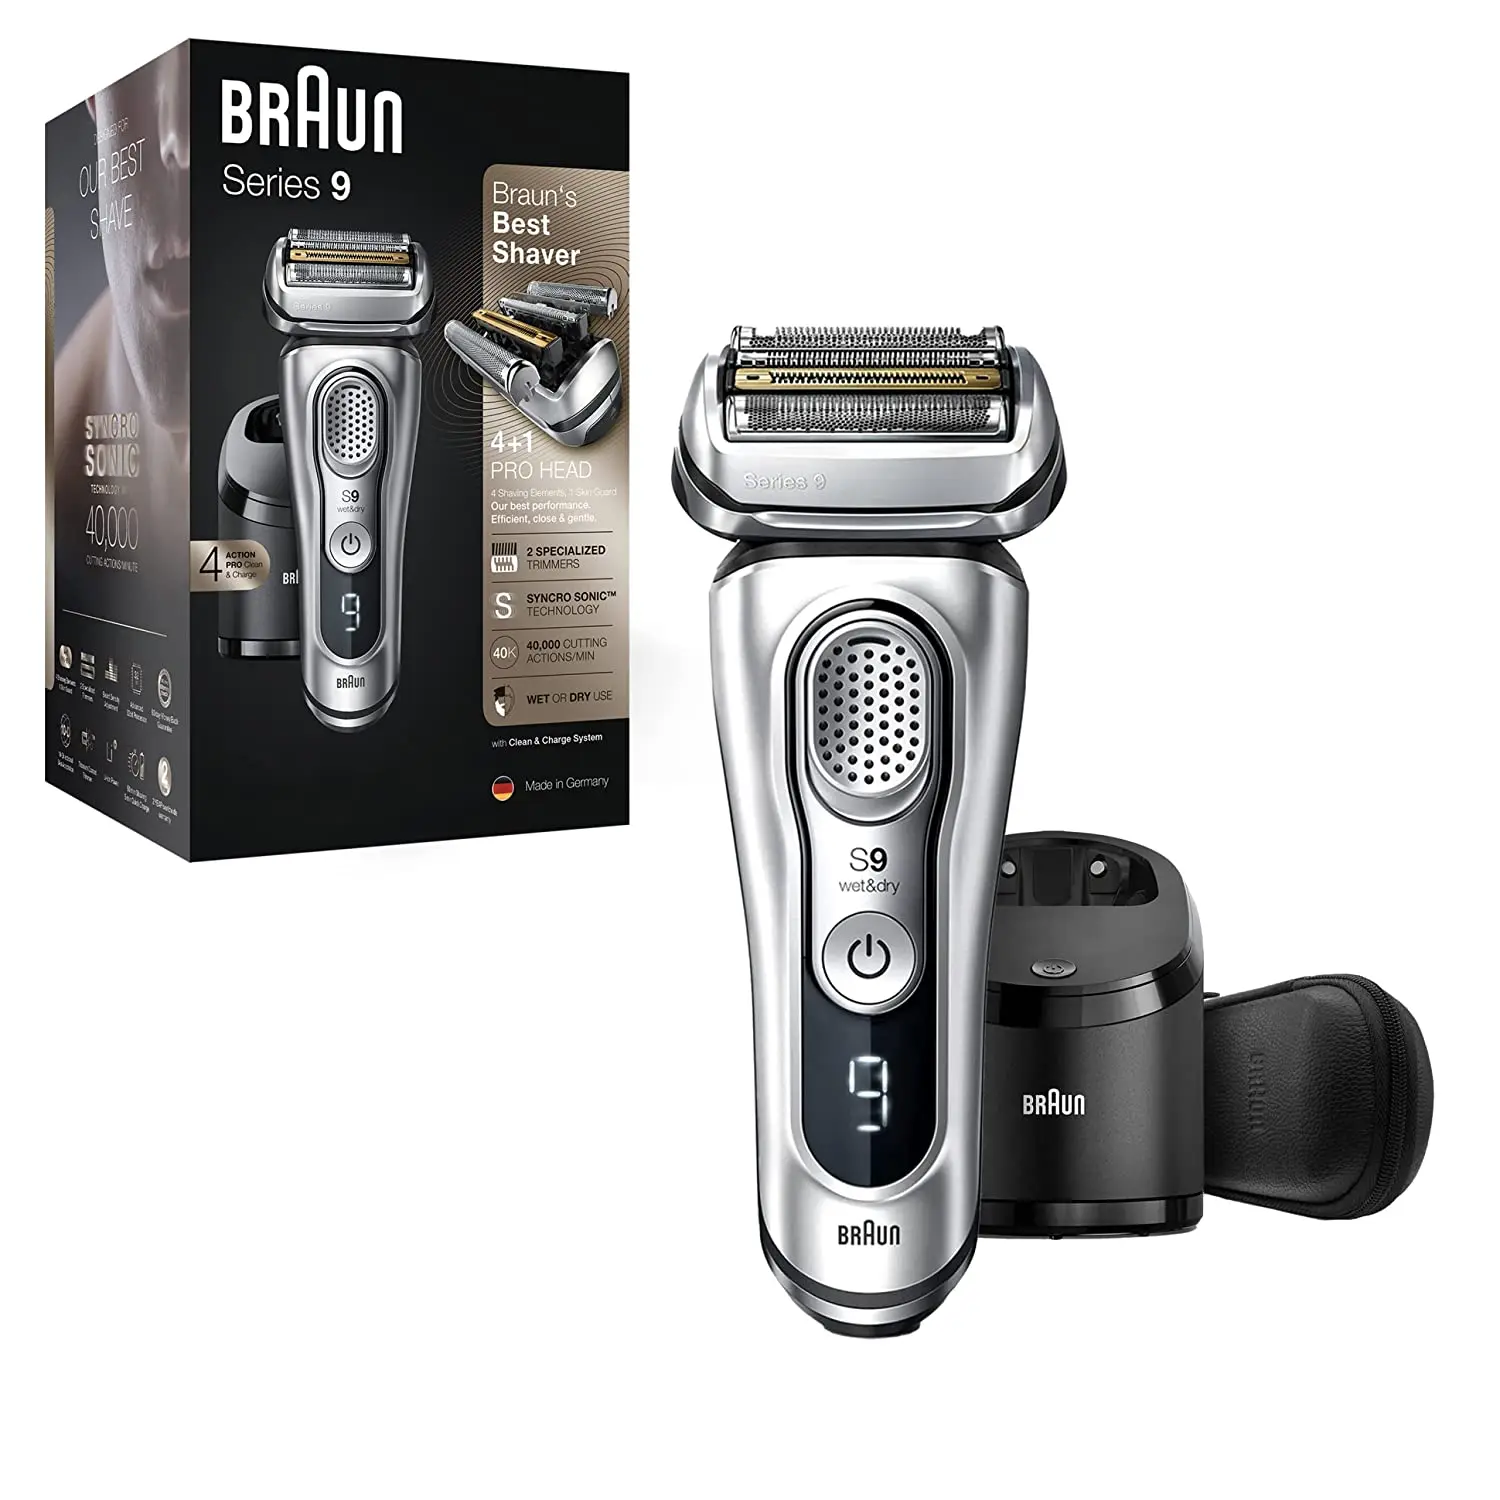 

Braun Electric Razor for Men, Waterproof Foil Shaver, Series 9 9390cc, Wet & Dry Shave, With Pop-Up Beard Trimmer for Grooming,